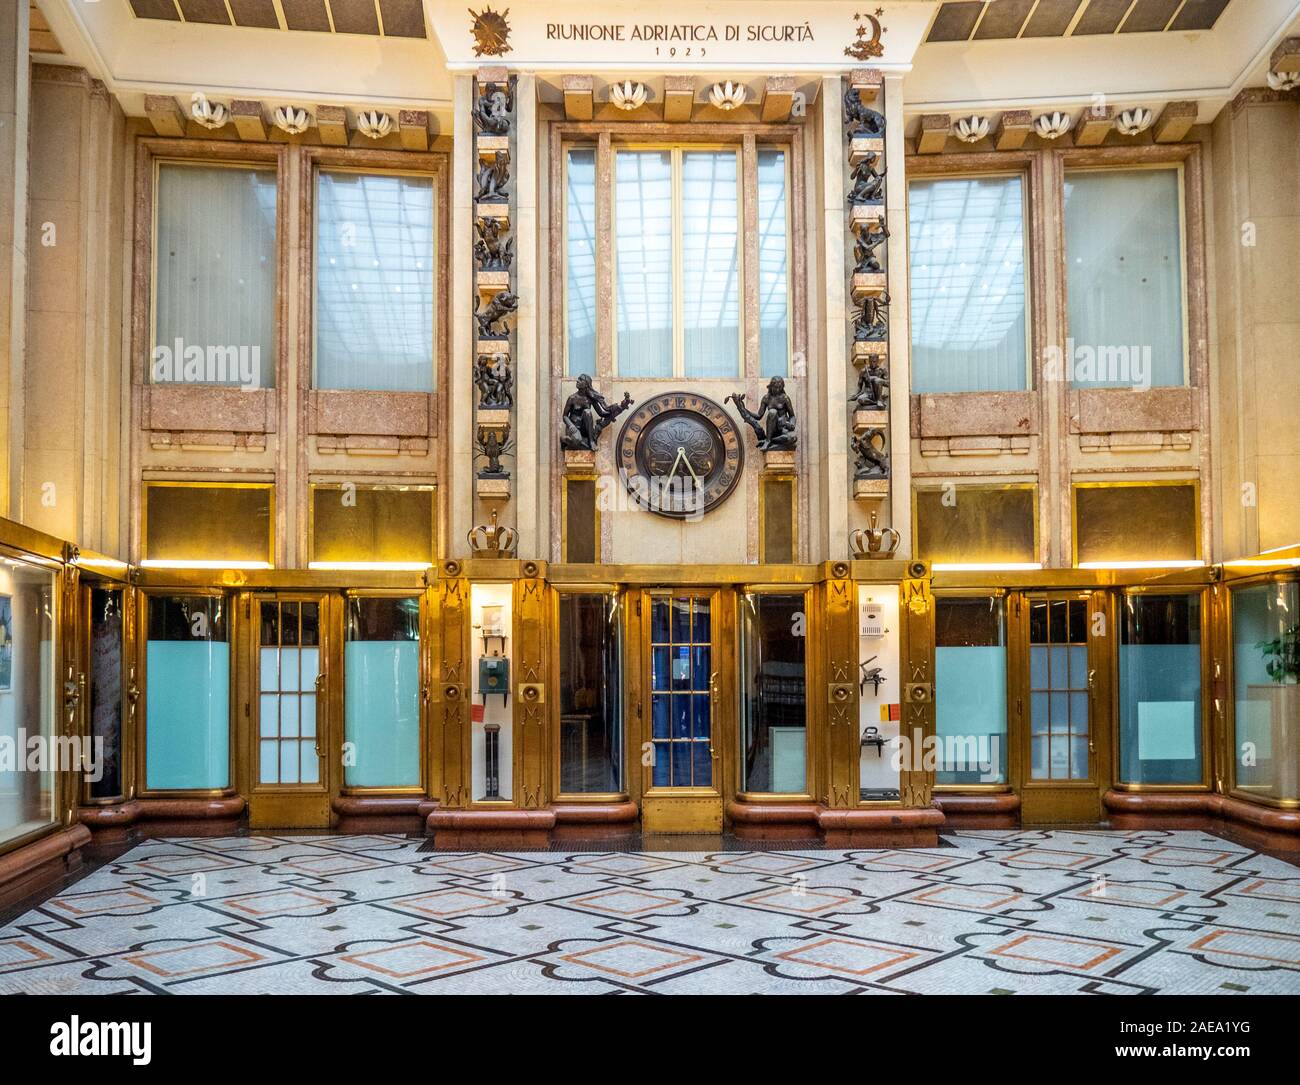 Decorative and ornate Art Deco style bronze statuettes and 24 hour clock  in foyer of Adria Passage Adria Palace New Town Prague Czech Republic. Stock Photo